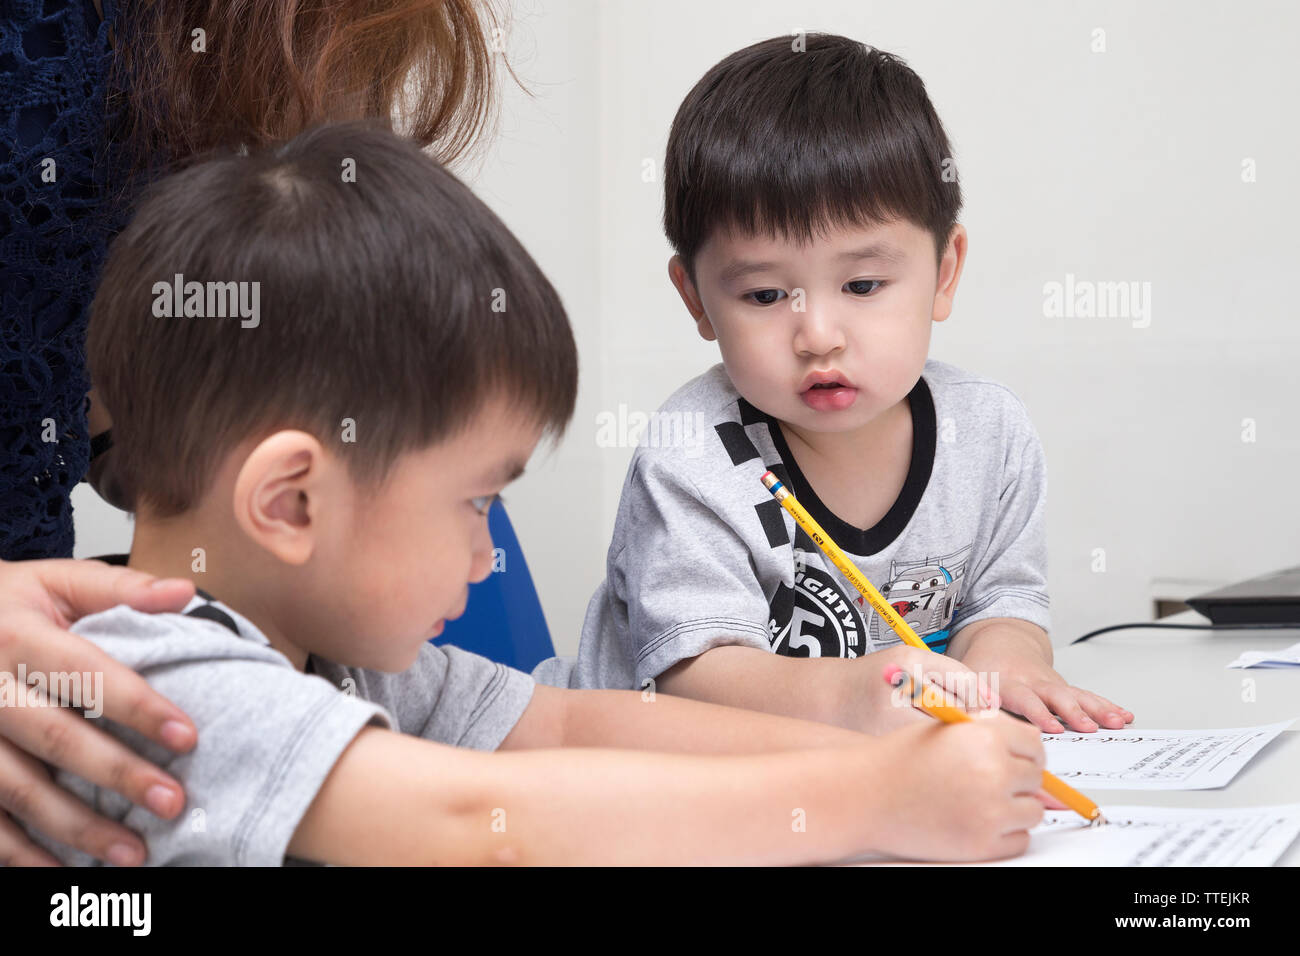 Manila, Philippines - August, 18, 2016: Two little boys learning to write with a pencil in classroom at school Stock Photo